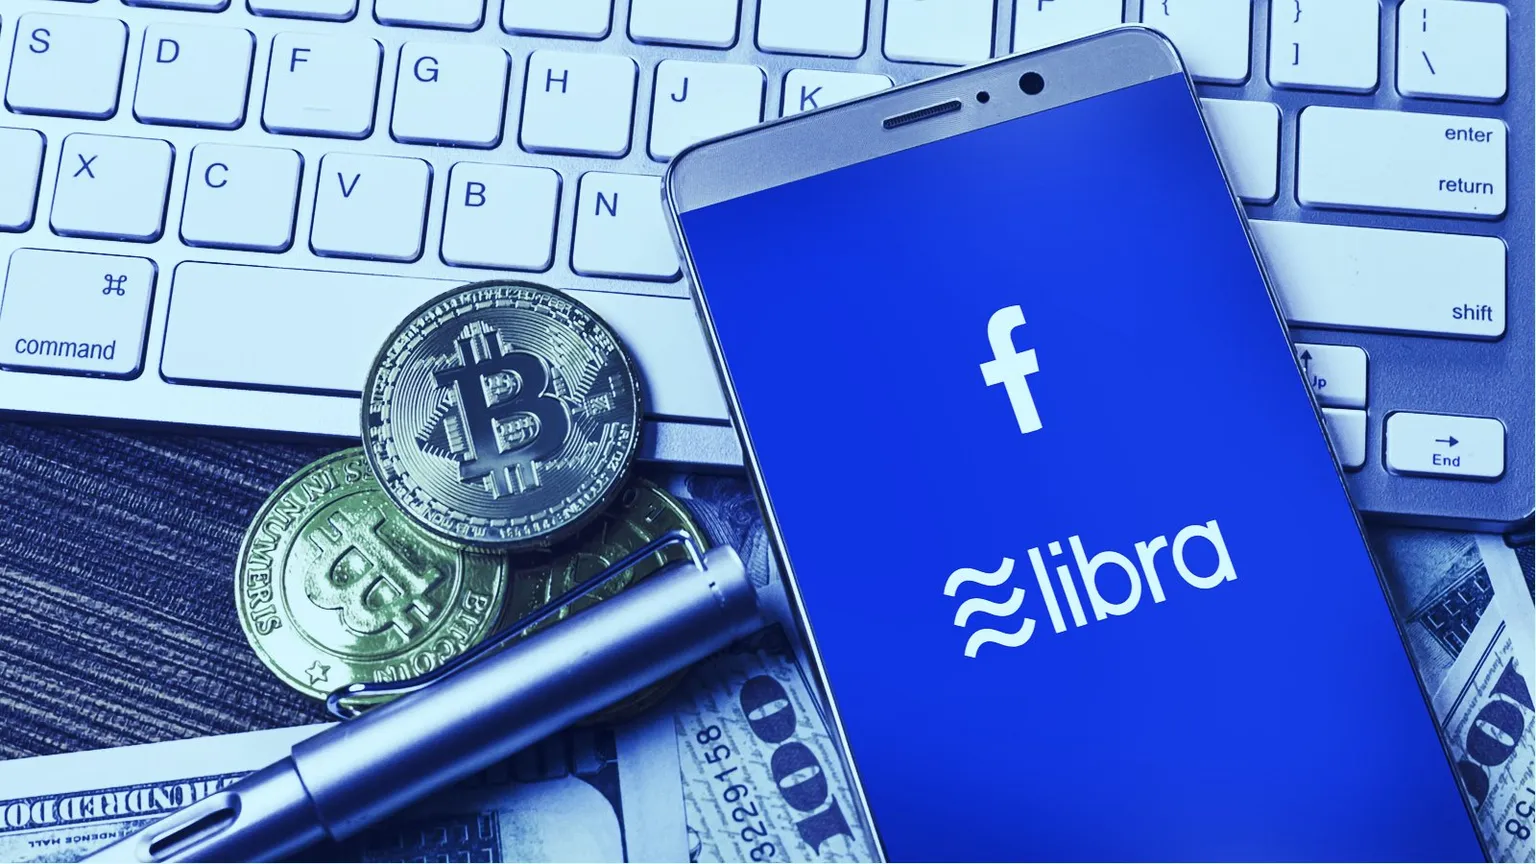 This week in crypto: Facebook, Minecraft, Zoom, and Goldman Sachs. Image: Shutterstock